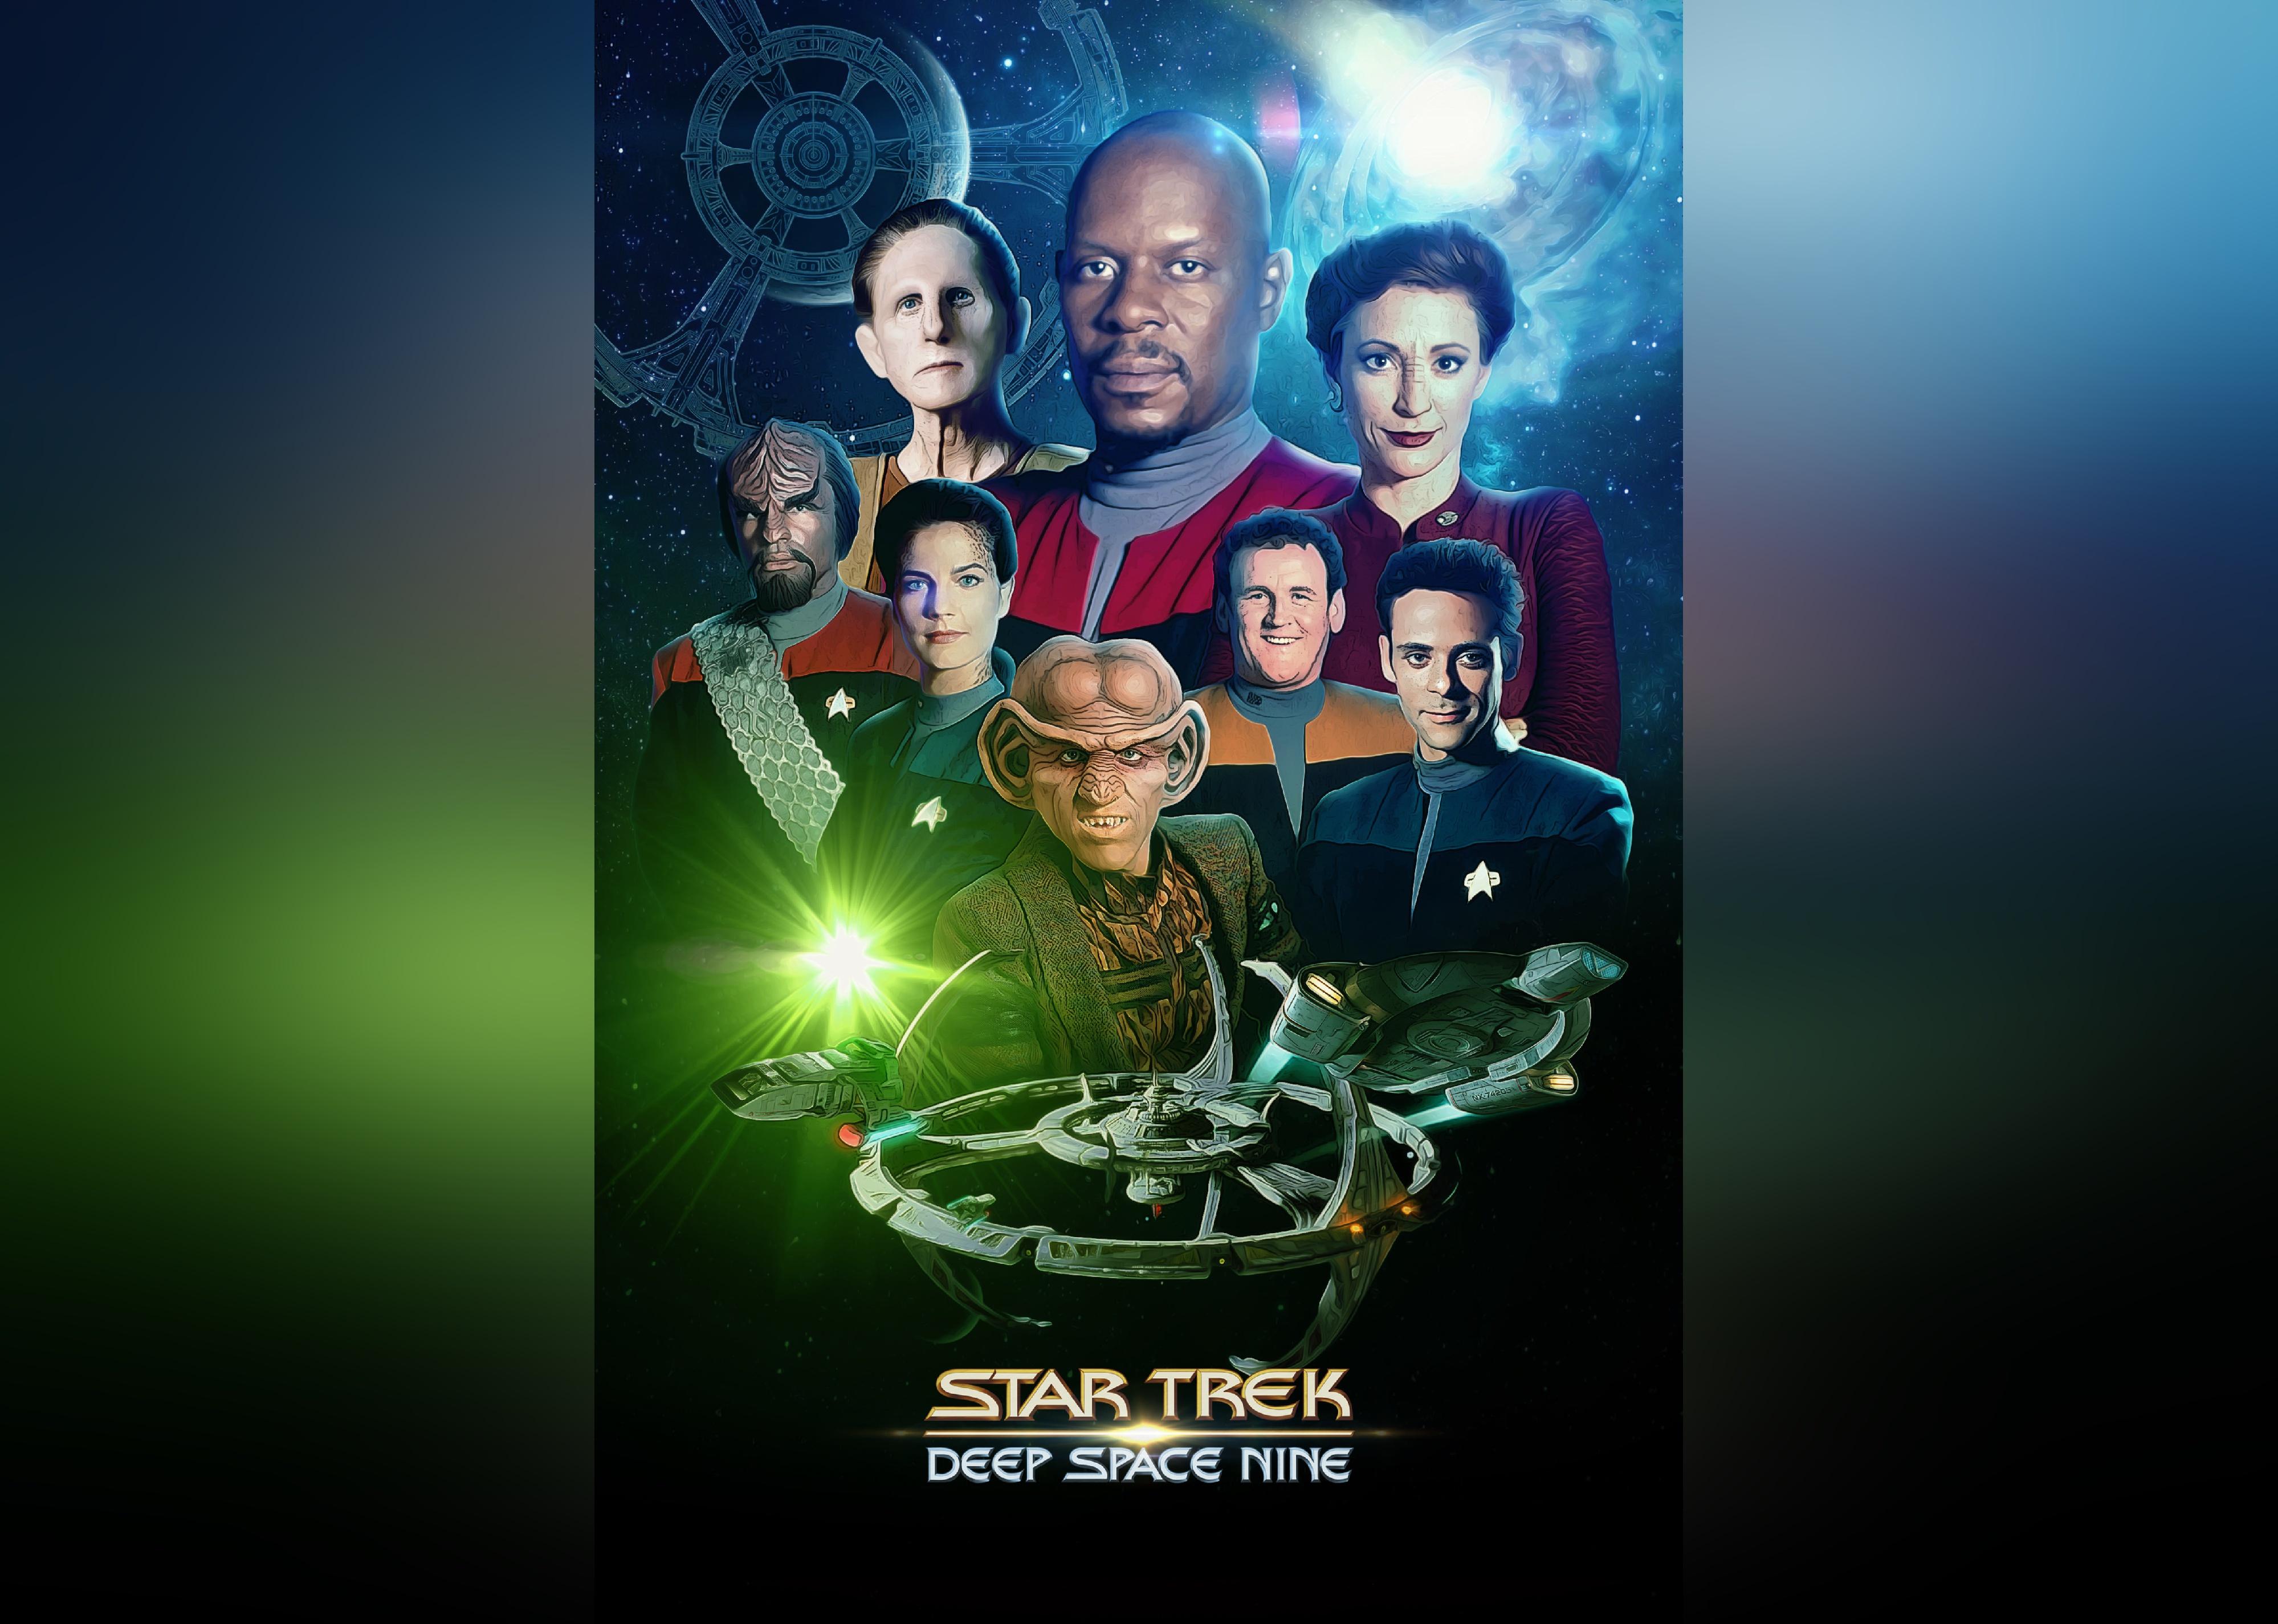 The Star Trek characters on a TV poster.